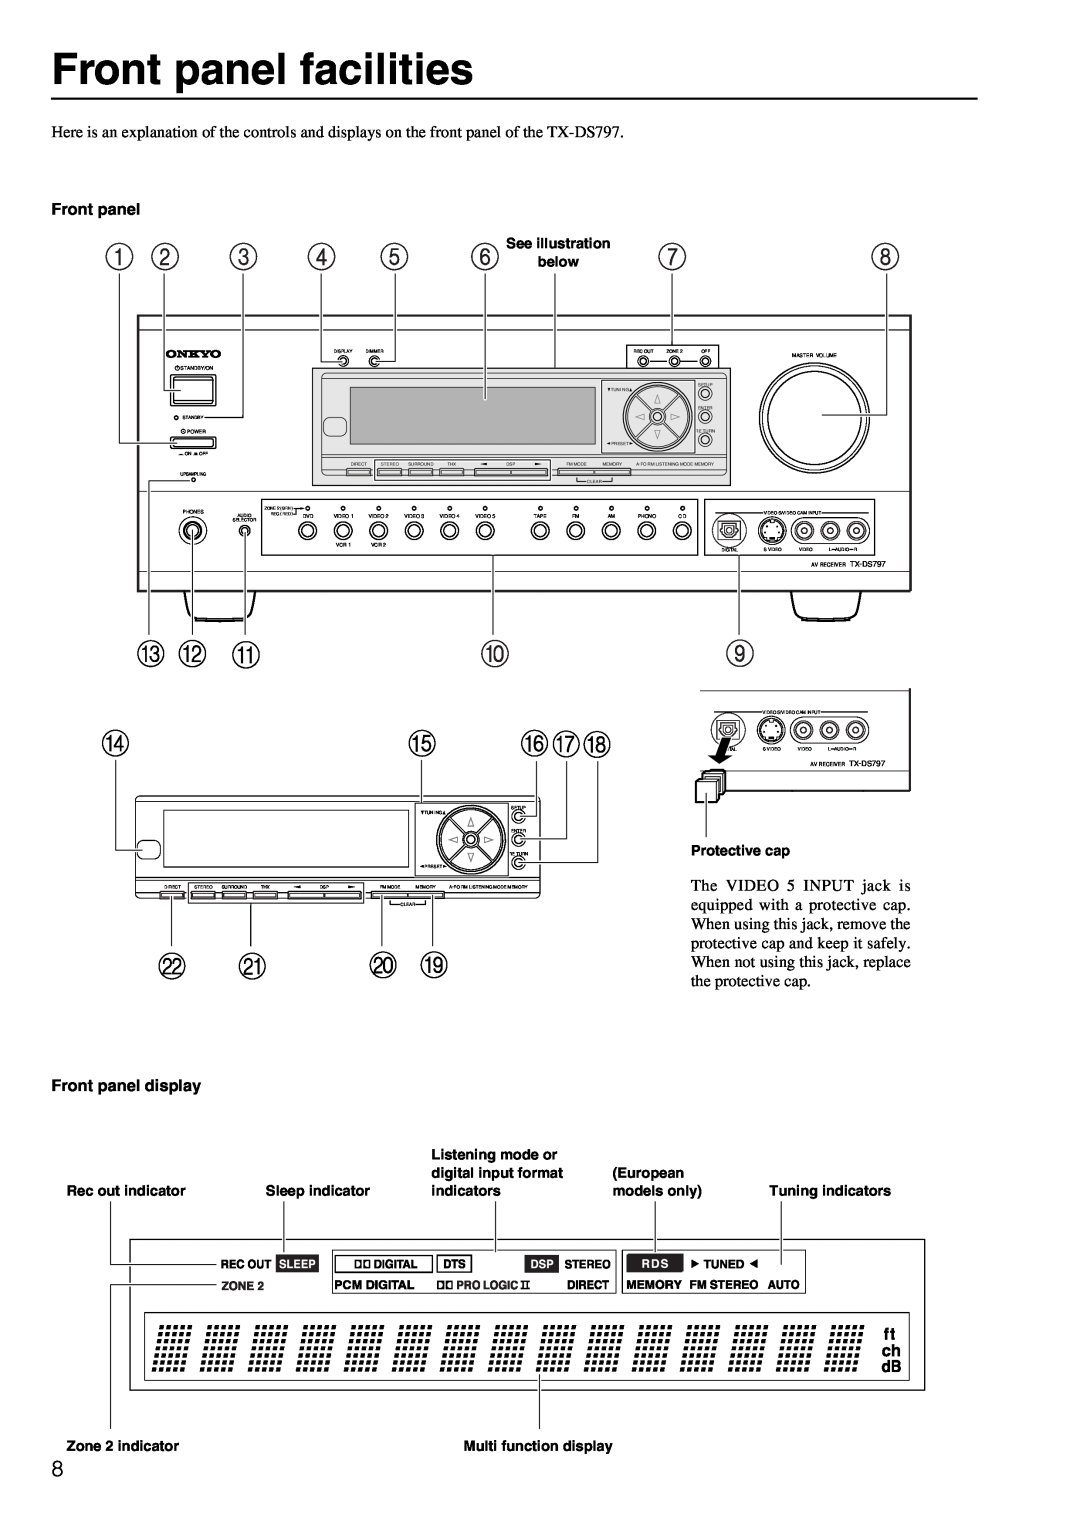 Onkyo TX-DS797 instruction manual Front panel facilities, Front panel display 